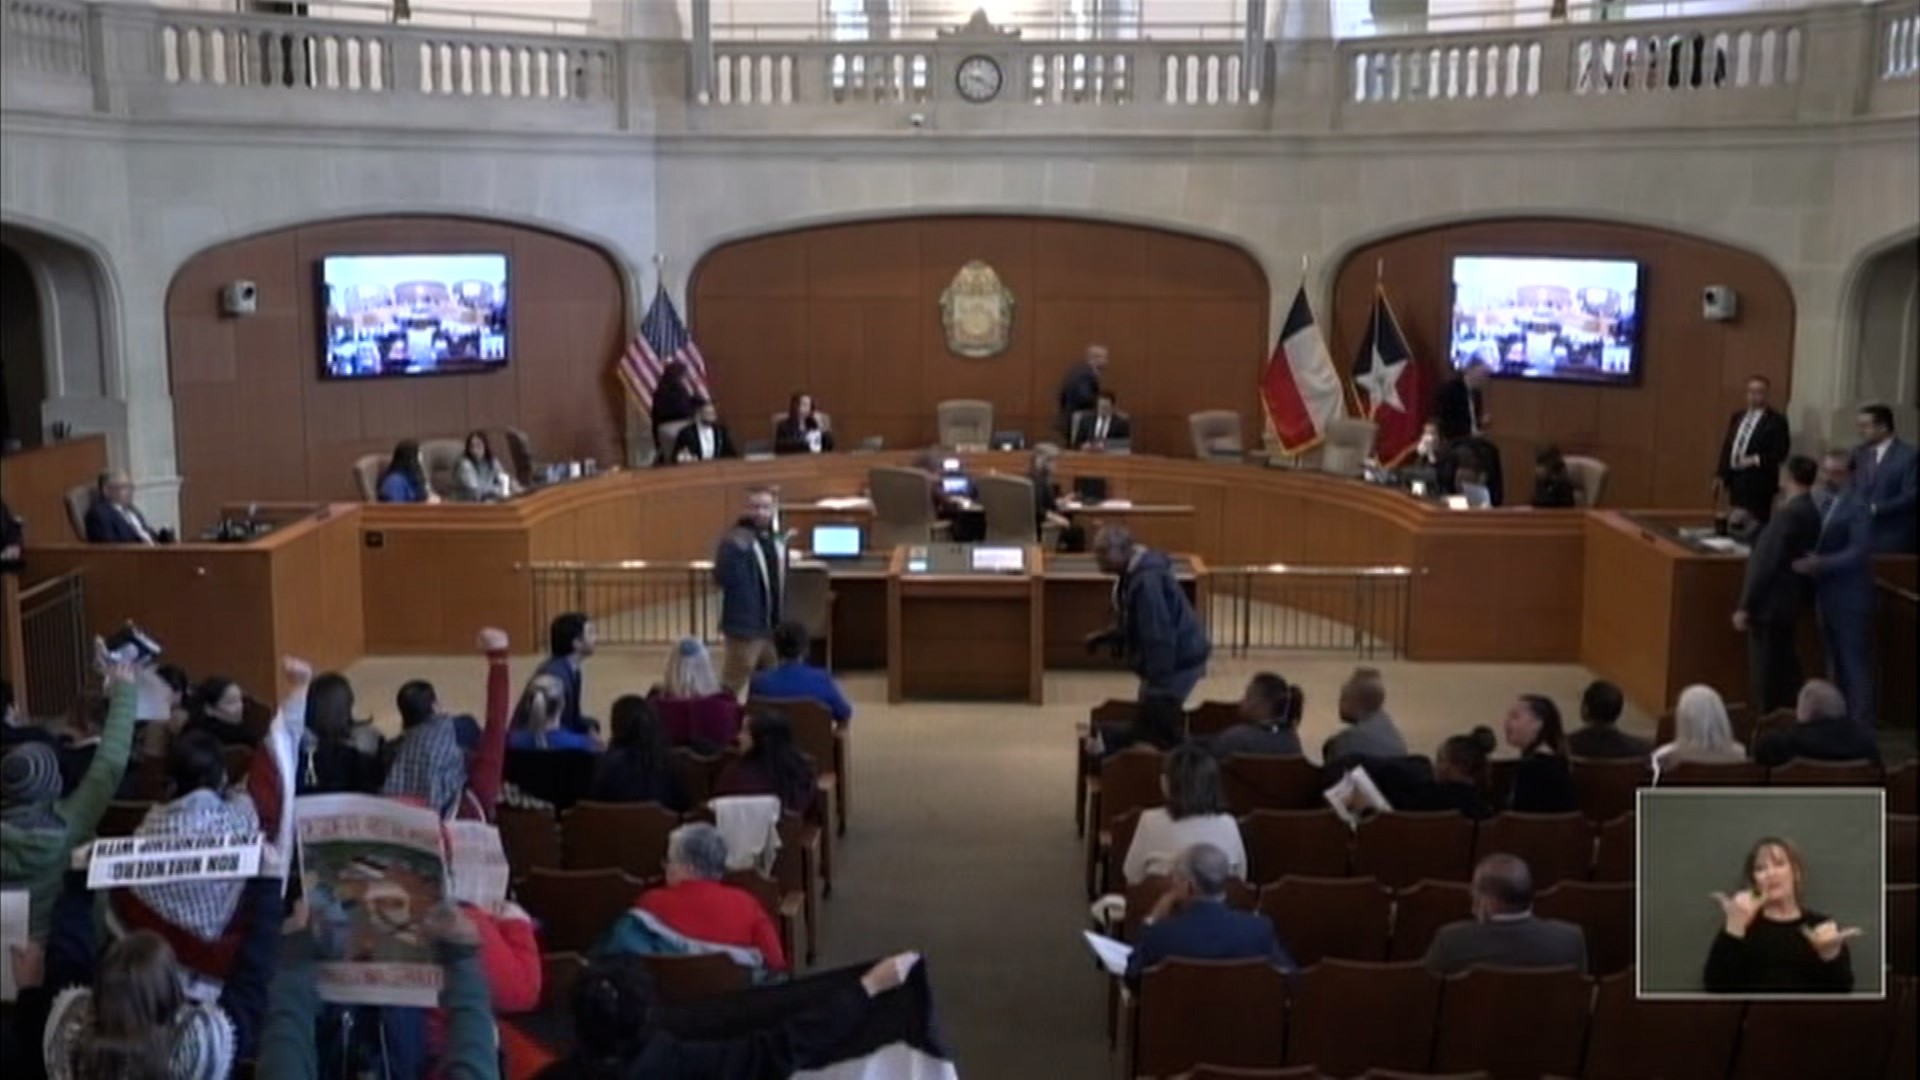 Pro-Palestine protesters interrupted Thursday's San Antonio City Council meeting.